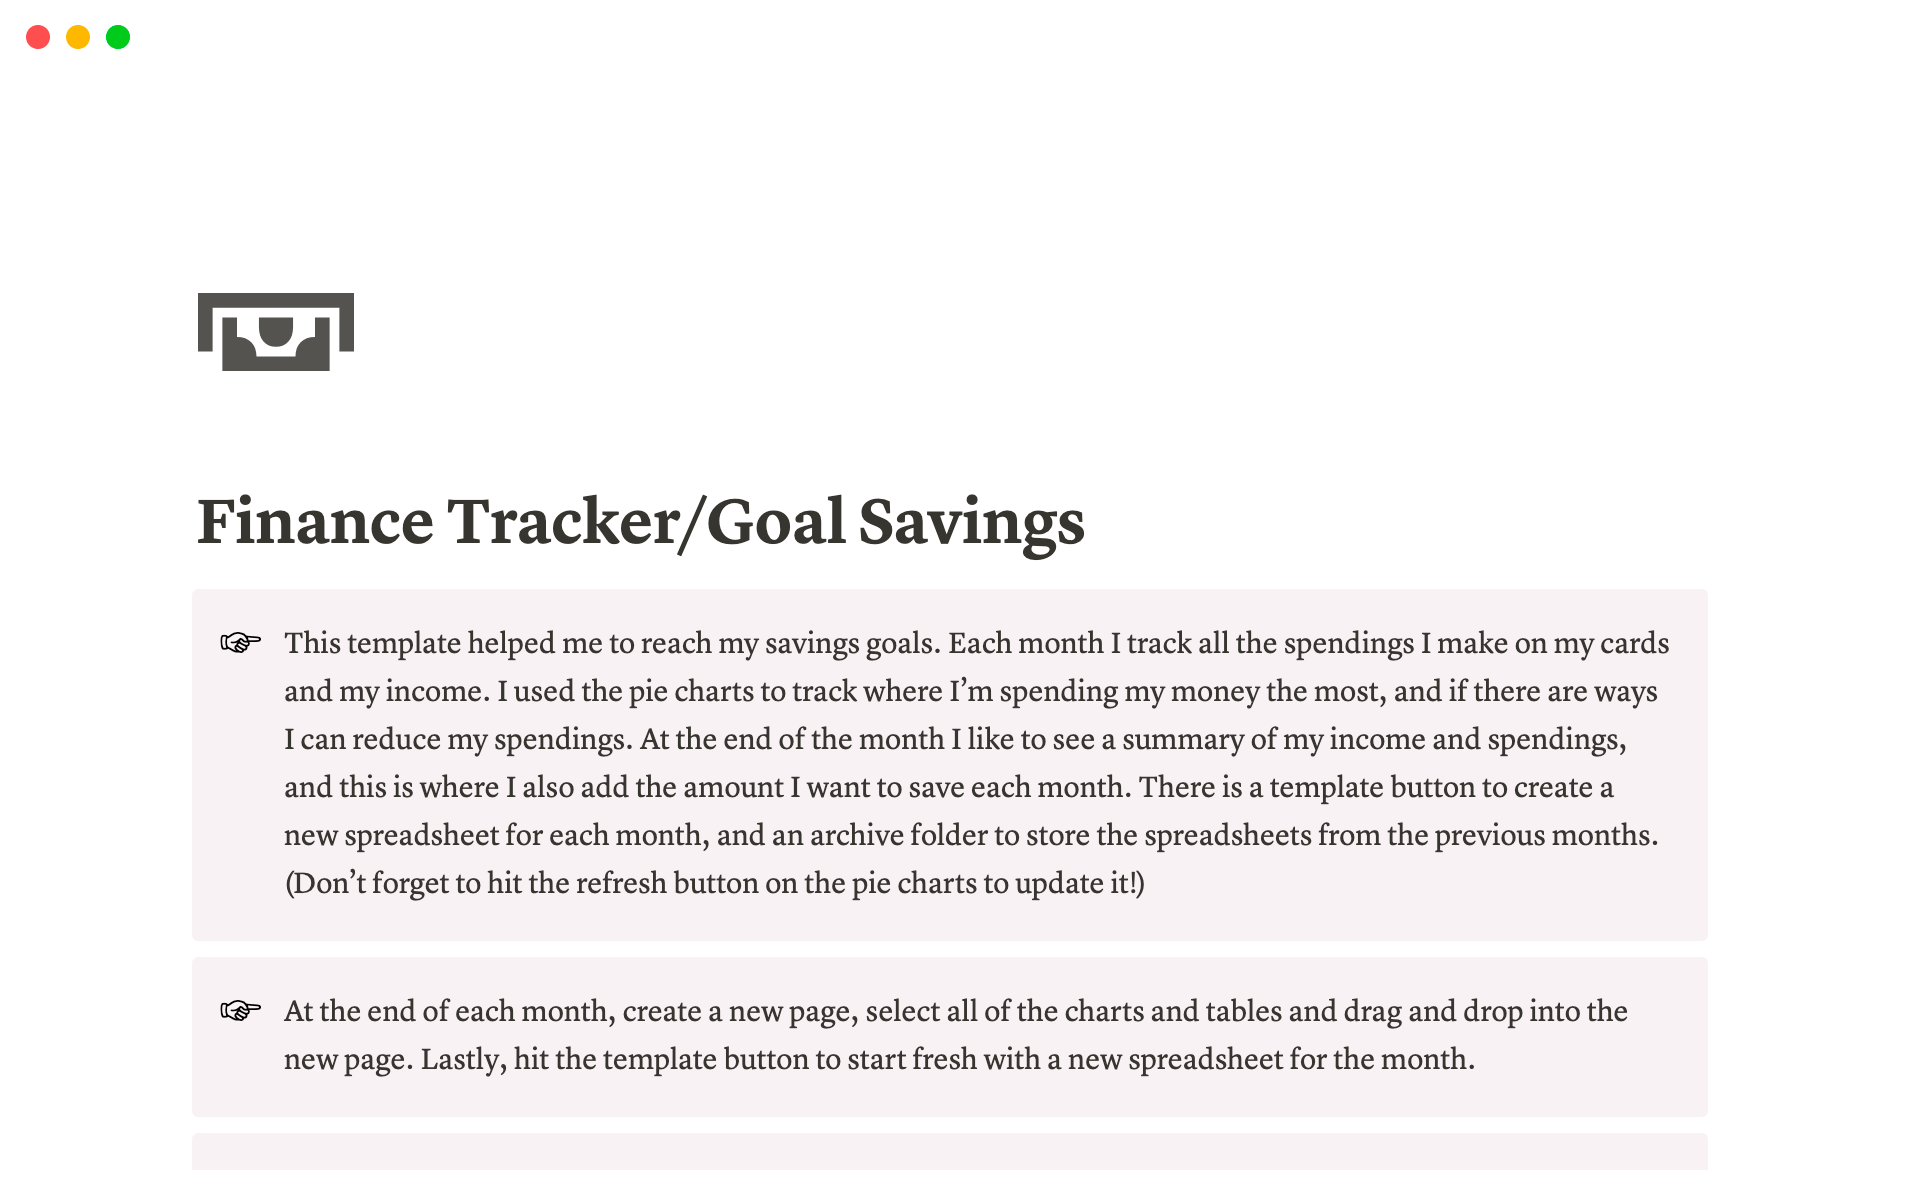 Keep track of your savings and spendings.